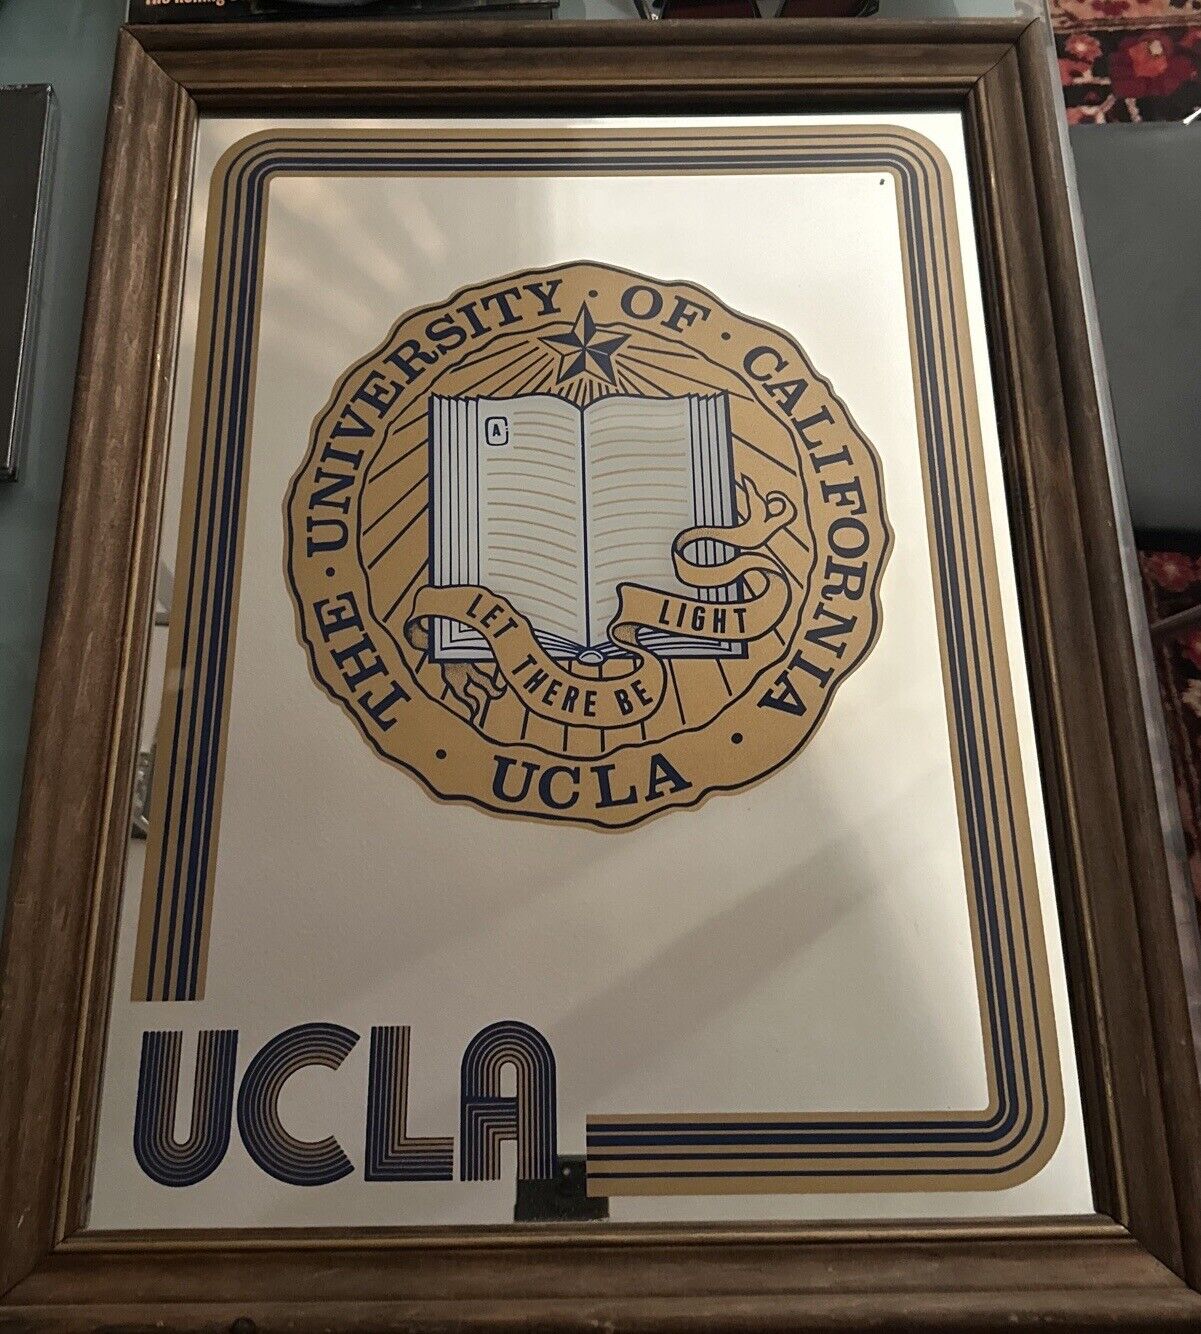 Vintage UCLA Motto Emblem Mirror “Let There Be Light” Framed 27” Tall